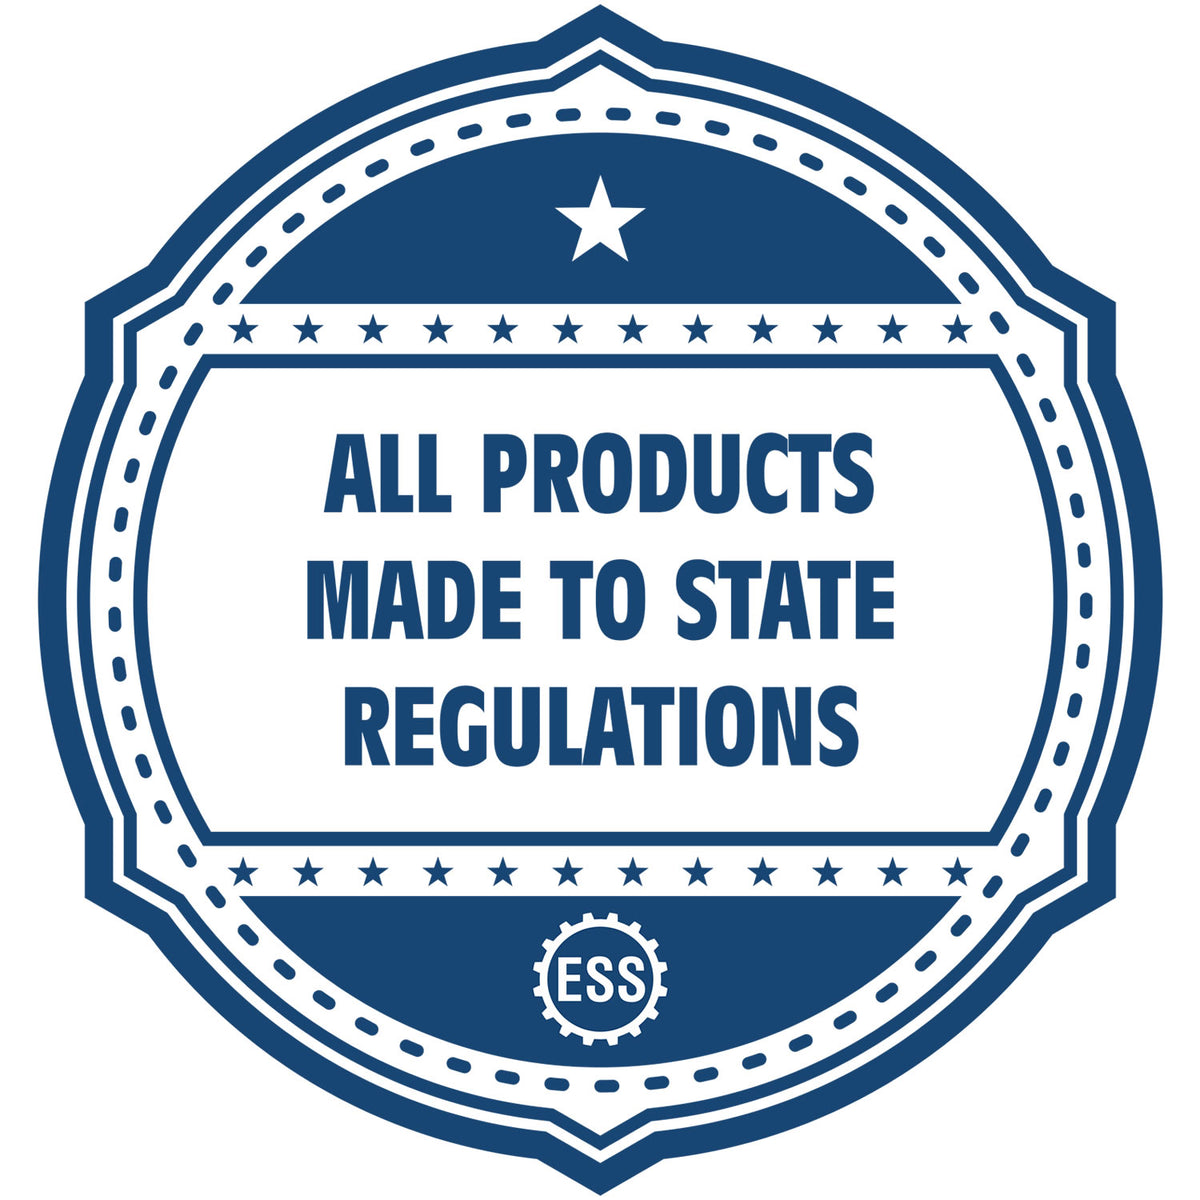 An icon or badge element for the Texas Professional Engineer Seal Stamp showing that this product is made in compliance with state regulations.